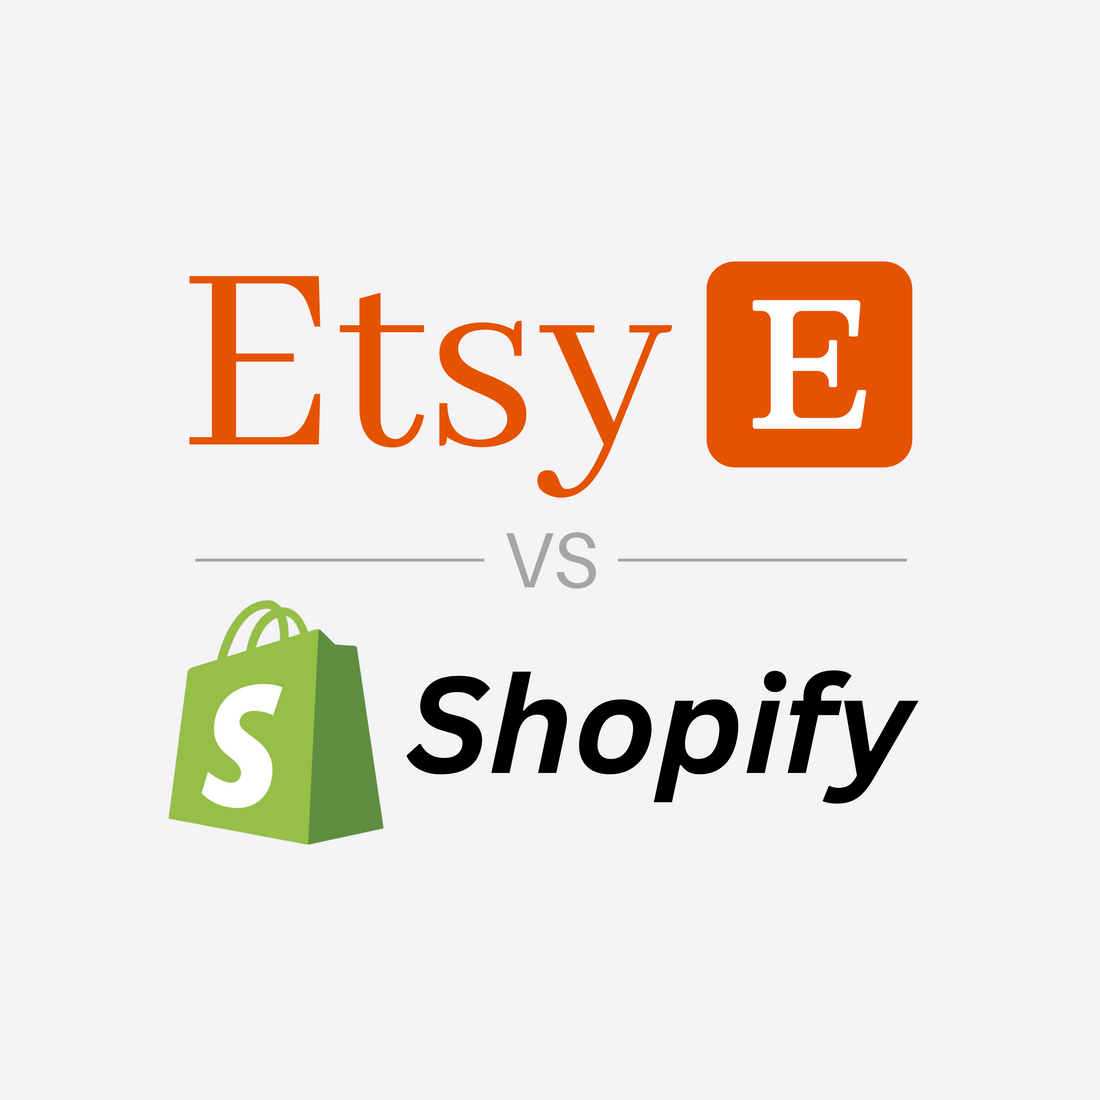 Should I Start with Etsy or Shopify for my Small Business?